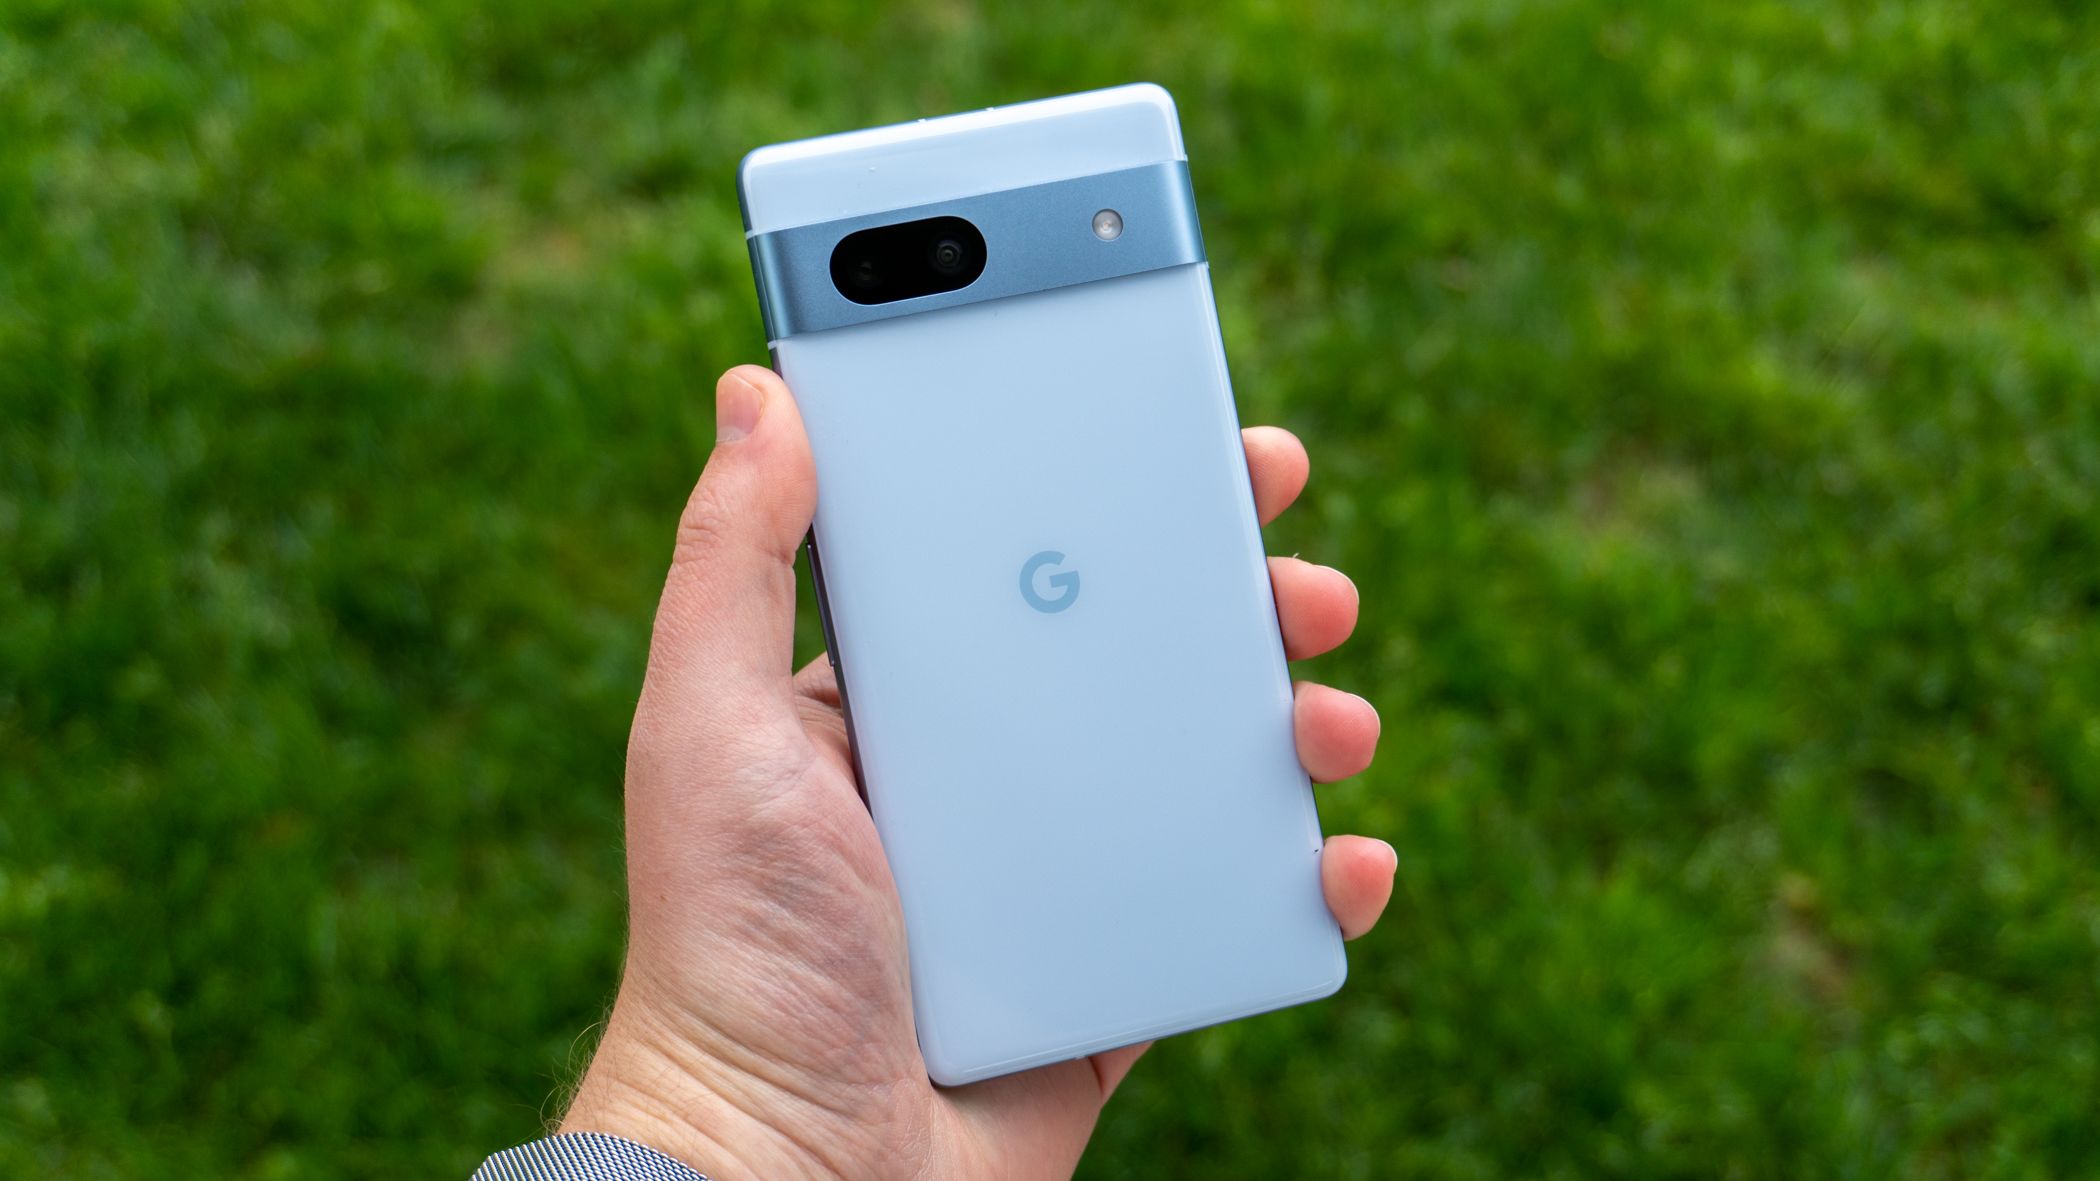 Google Pixel 6a Review: Just In Time To Replace The 3a [U] 9to5Google ...